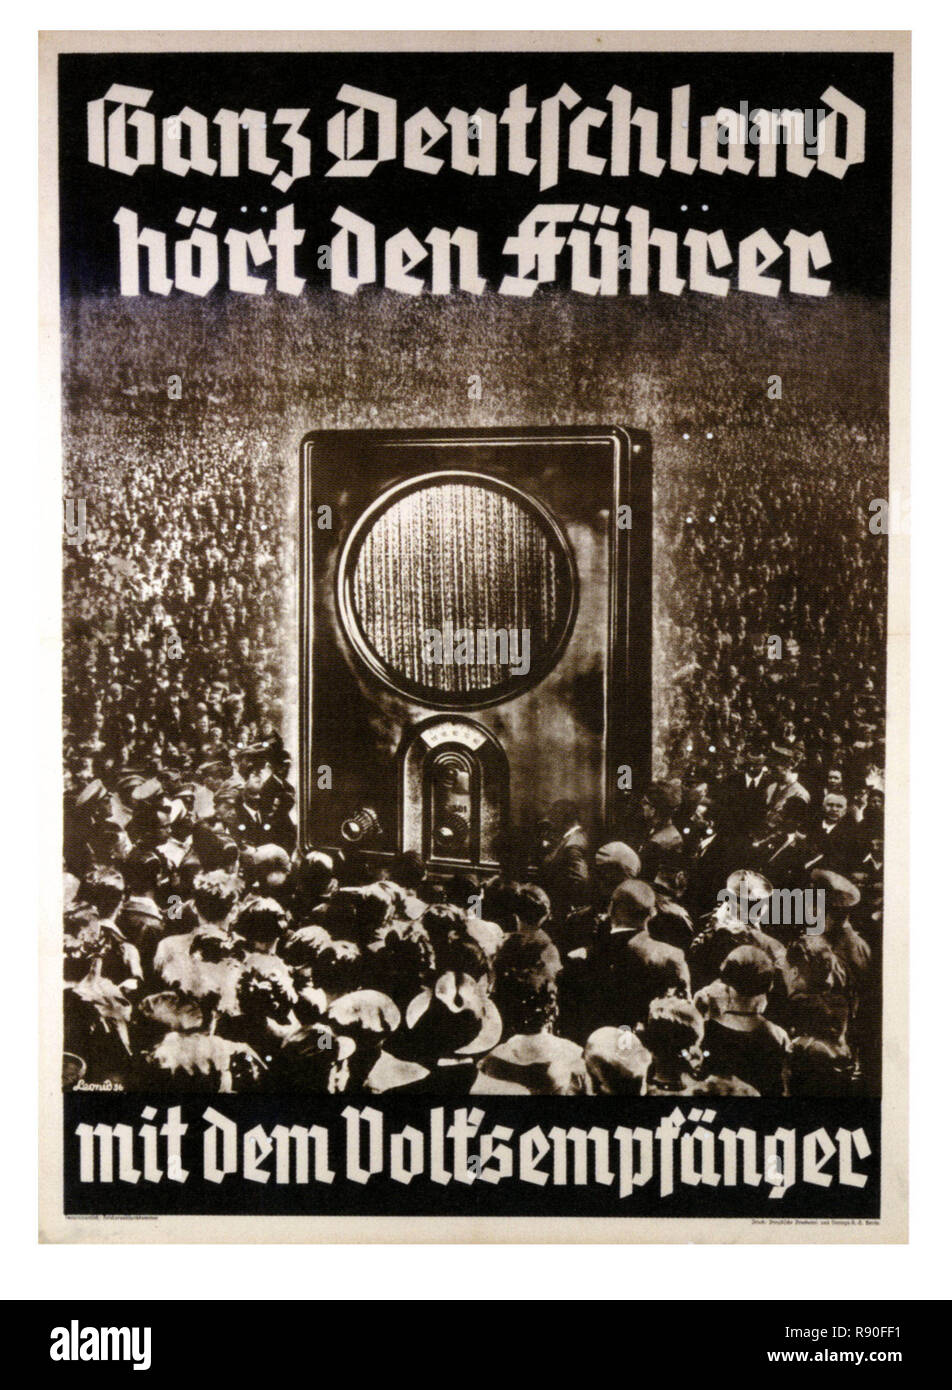 All Of Germany Hears The Fuhrer With The Peoples Radio - Vintage German Nazi Propaganda Poster Stock Photo